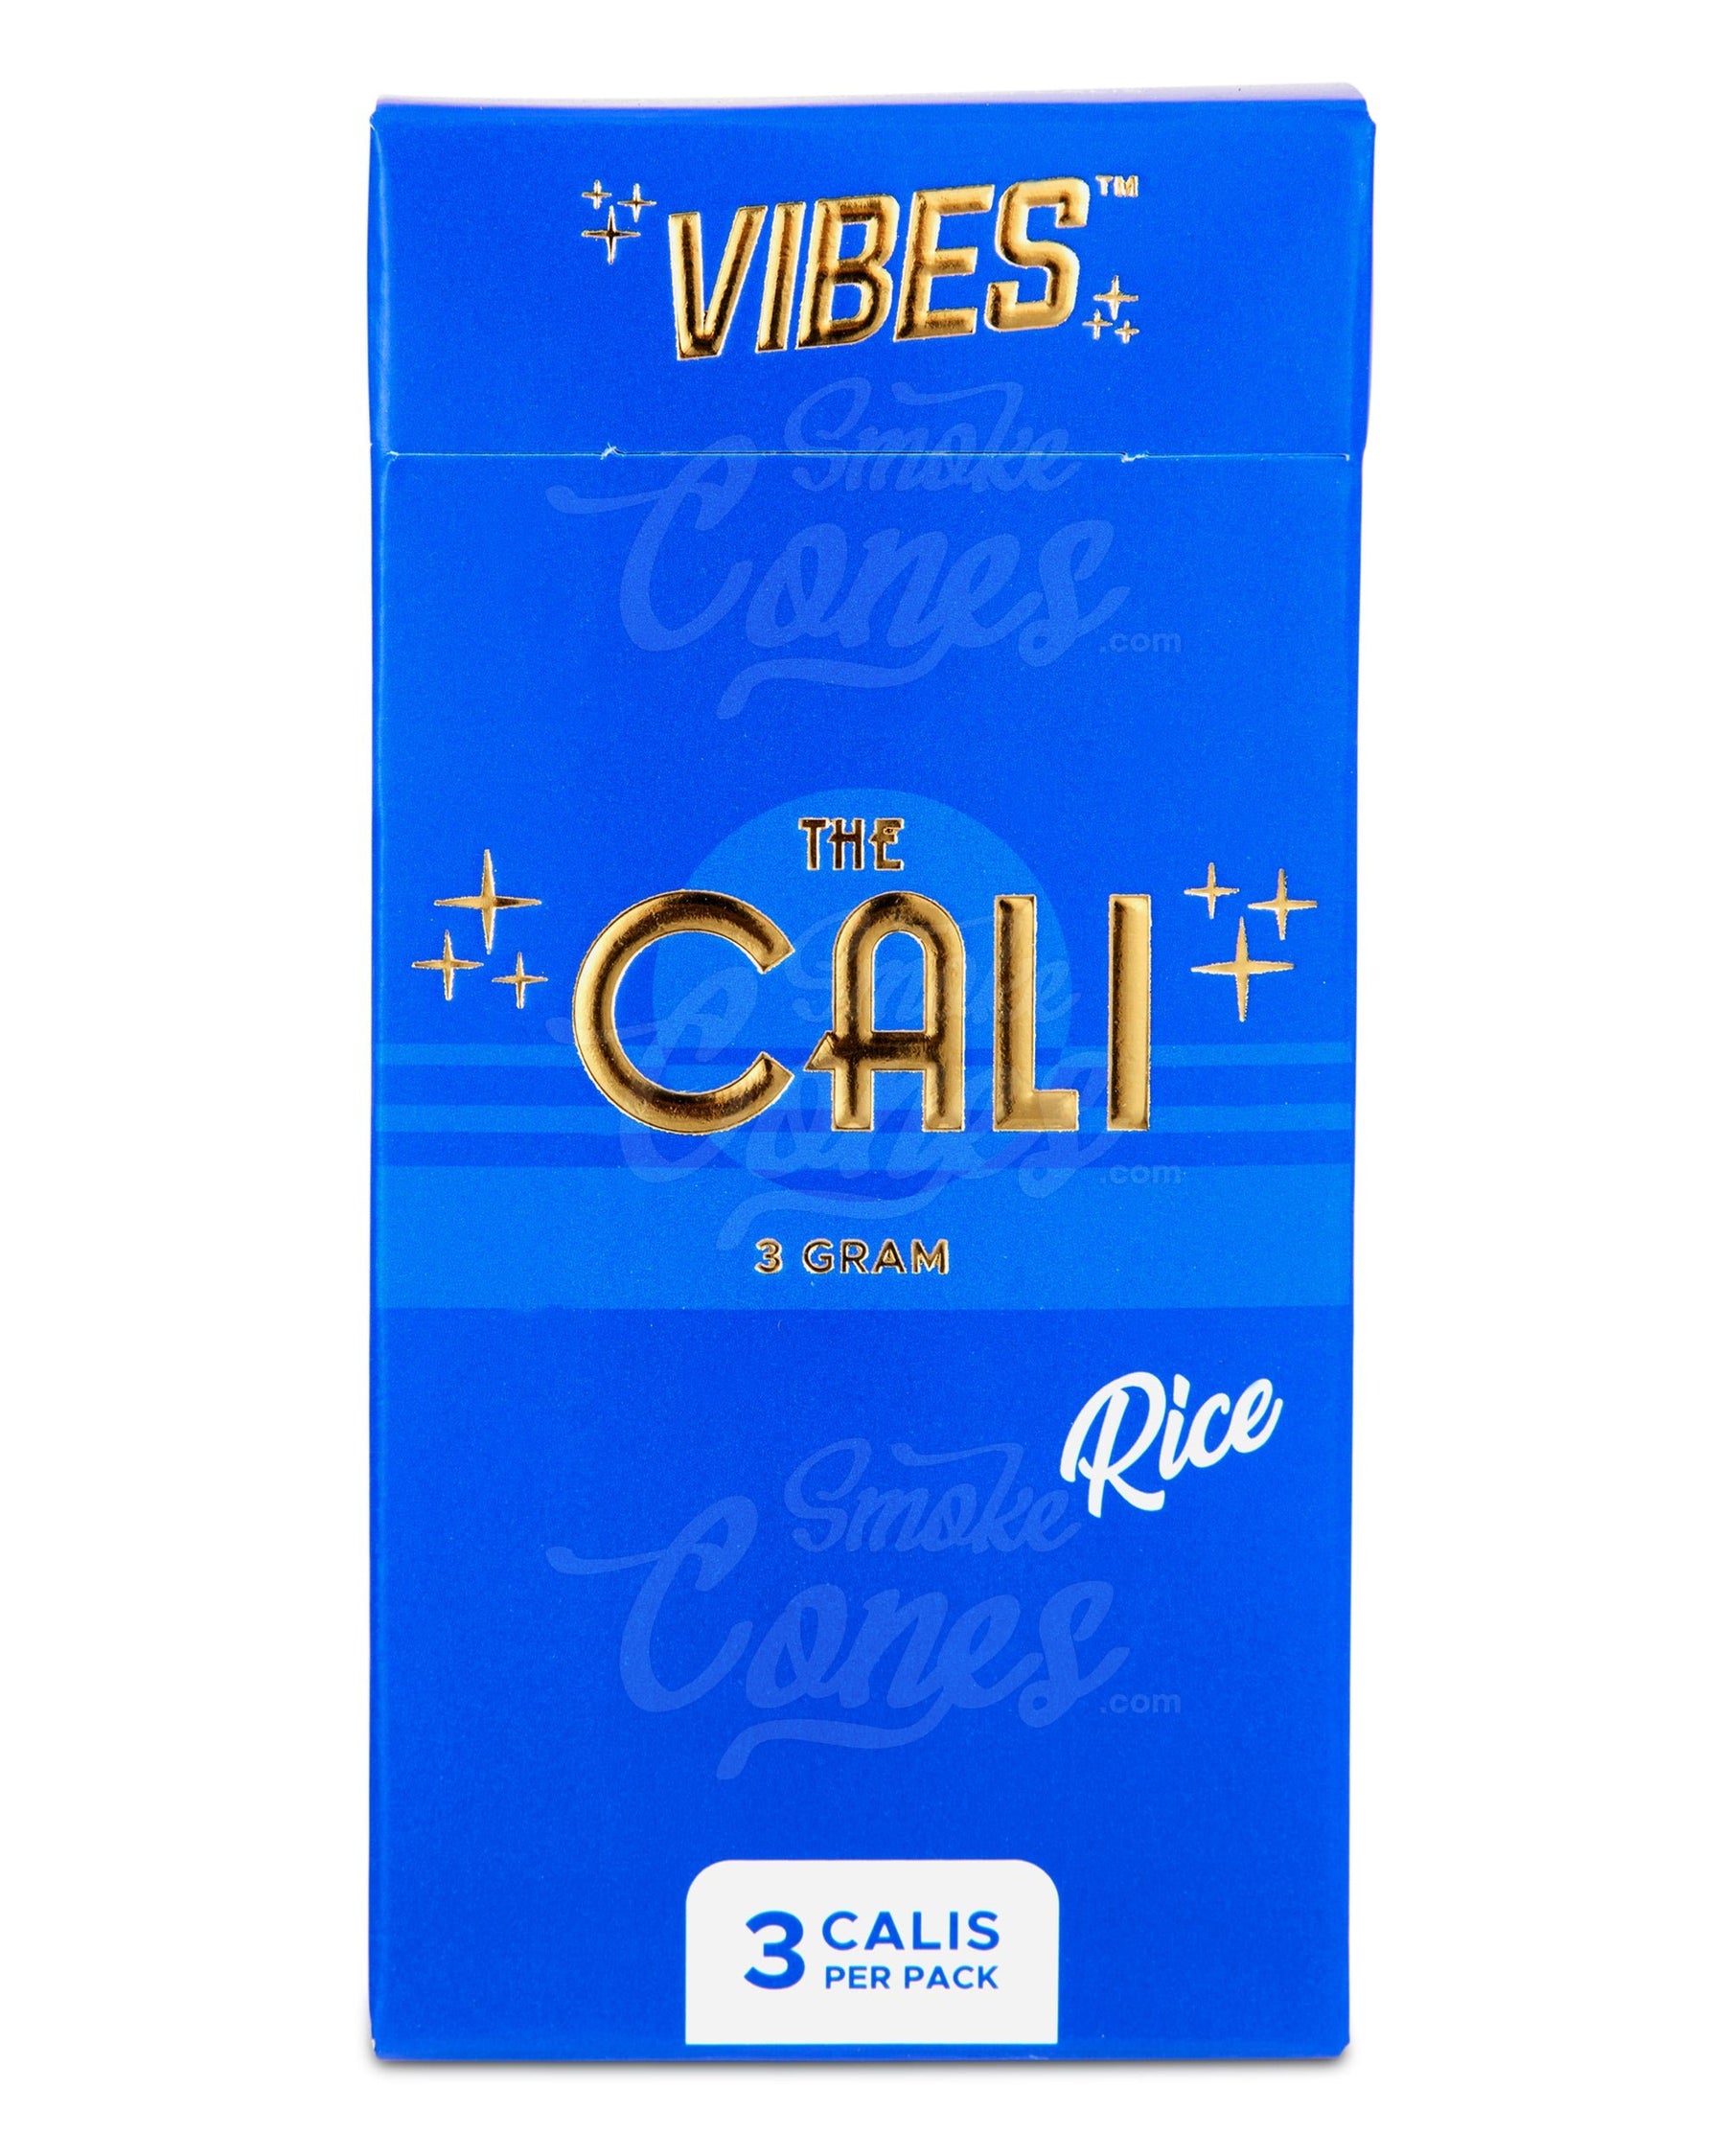 Vibes 110mm King Sized The Cali 3 Gram Pre Rolled Rice Paper Cones 24/Box - 2